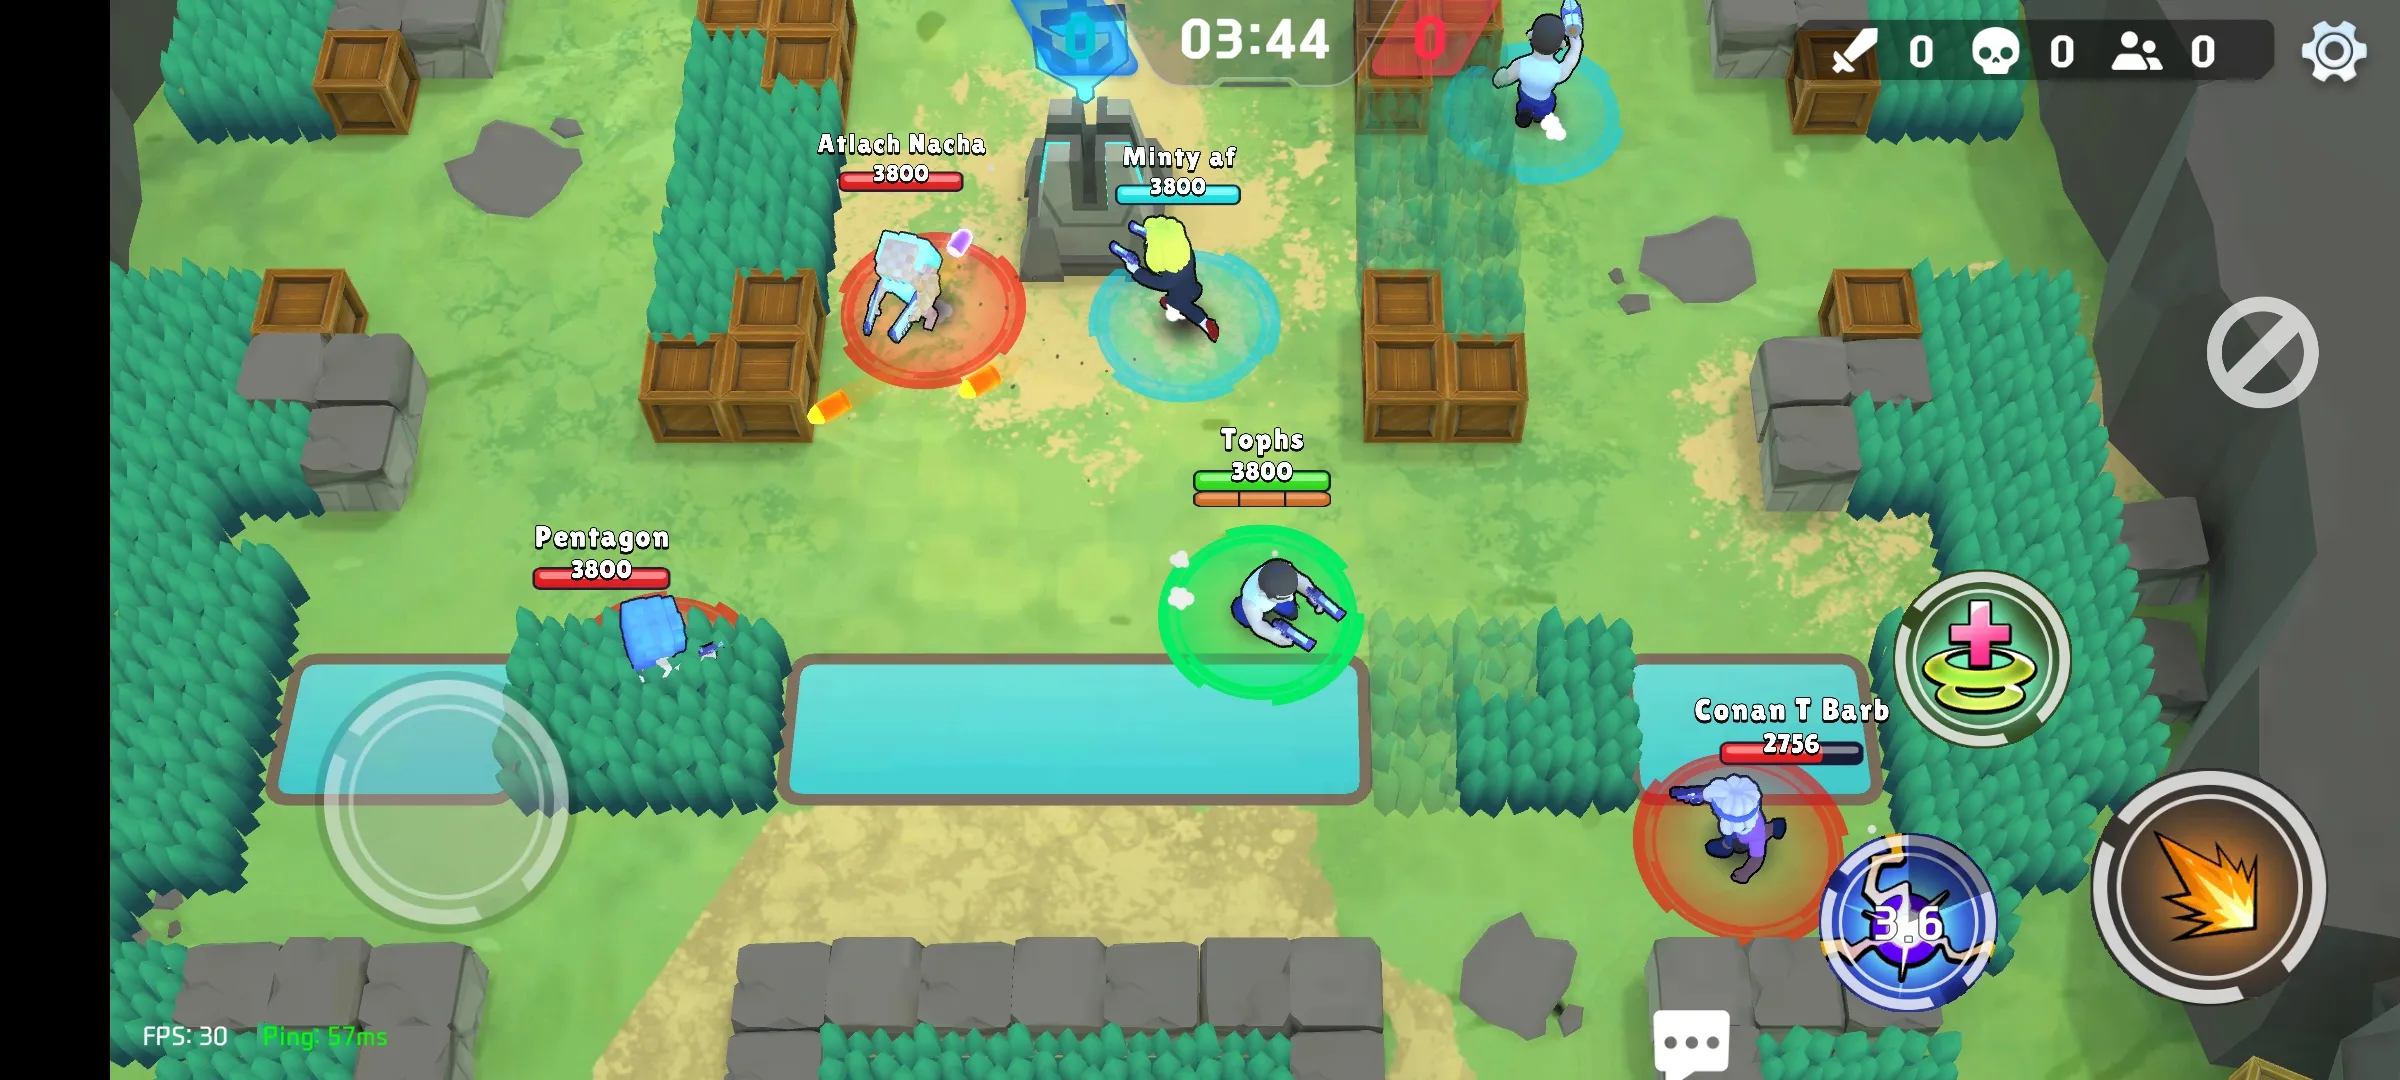 A Galaxy Fight Club screenshot displays PvP gameplay, with players forming two teams to battle for leaderboard rankings and earn greater rewards.